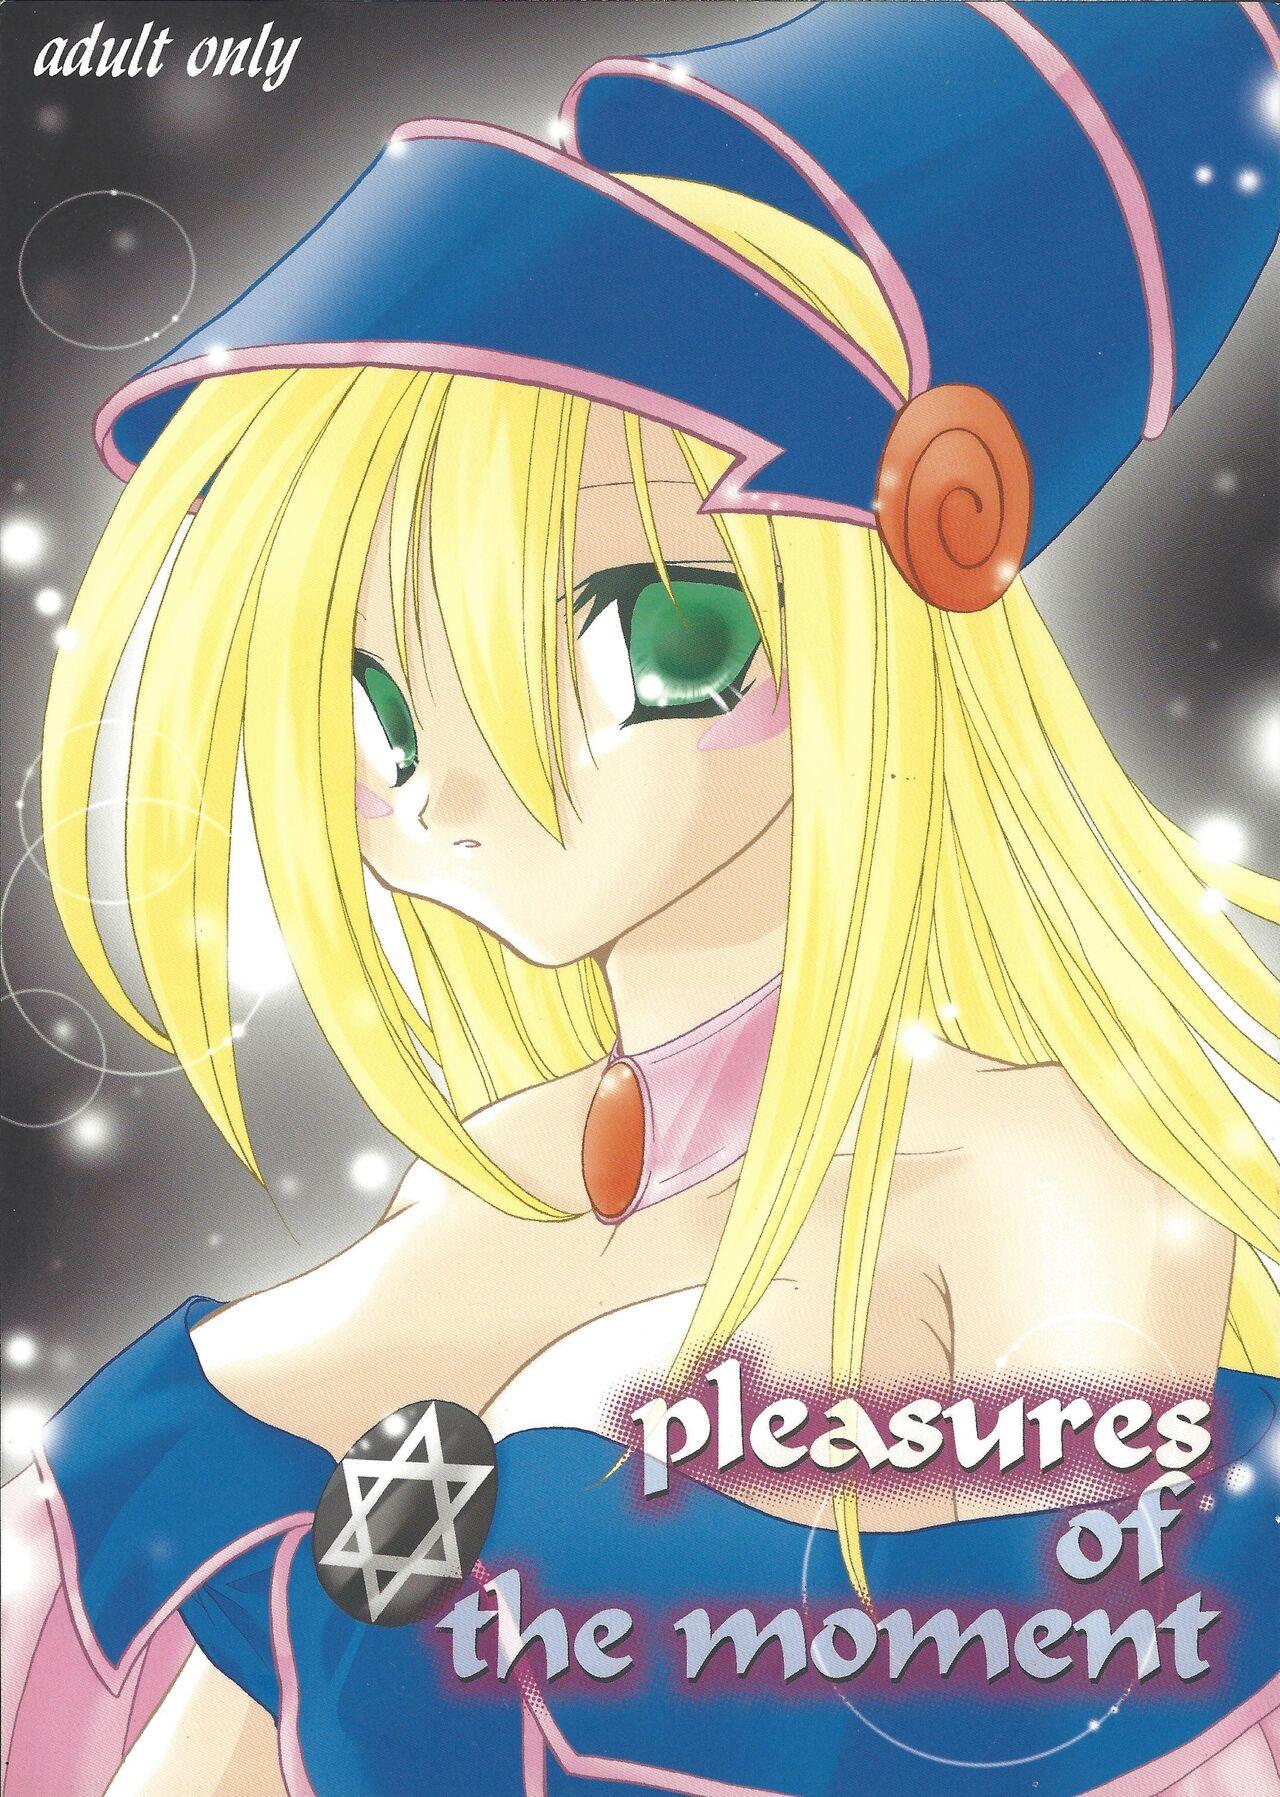 Gemidos pleasures of the moment - Yu gi oh Uncensored - Page 1